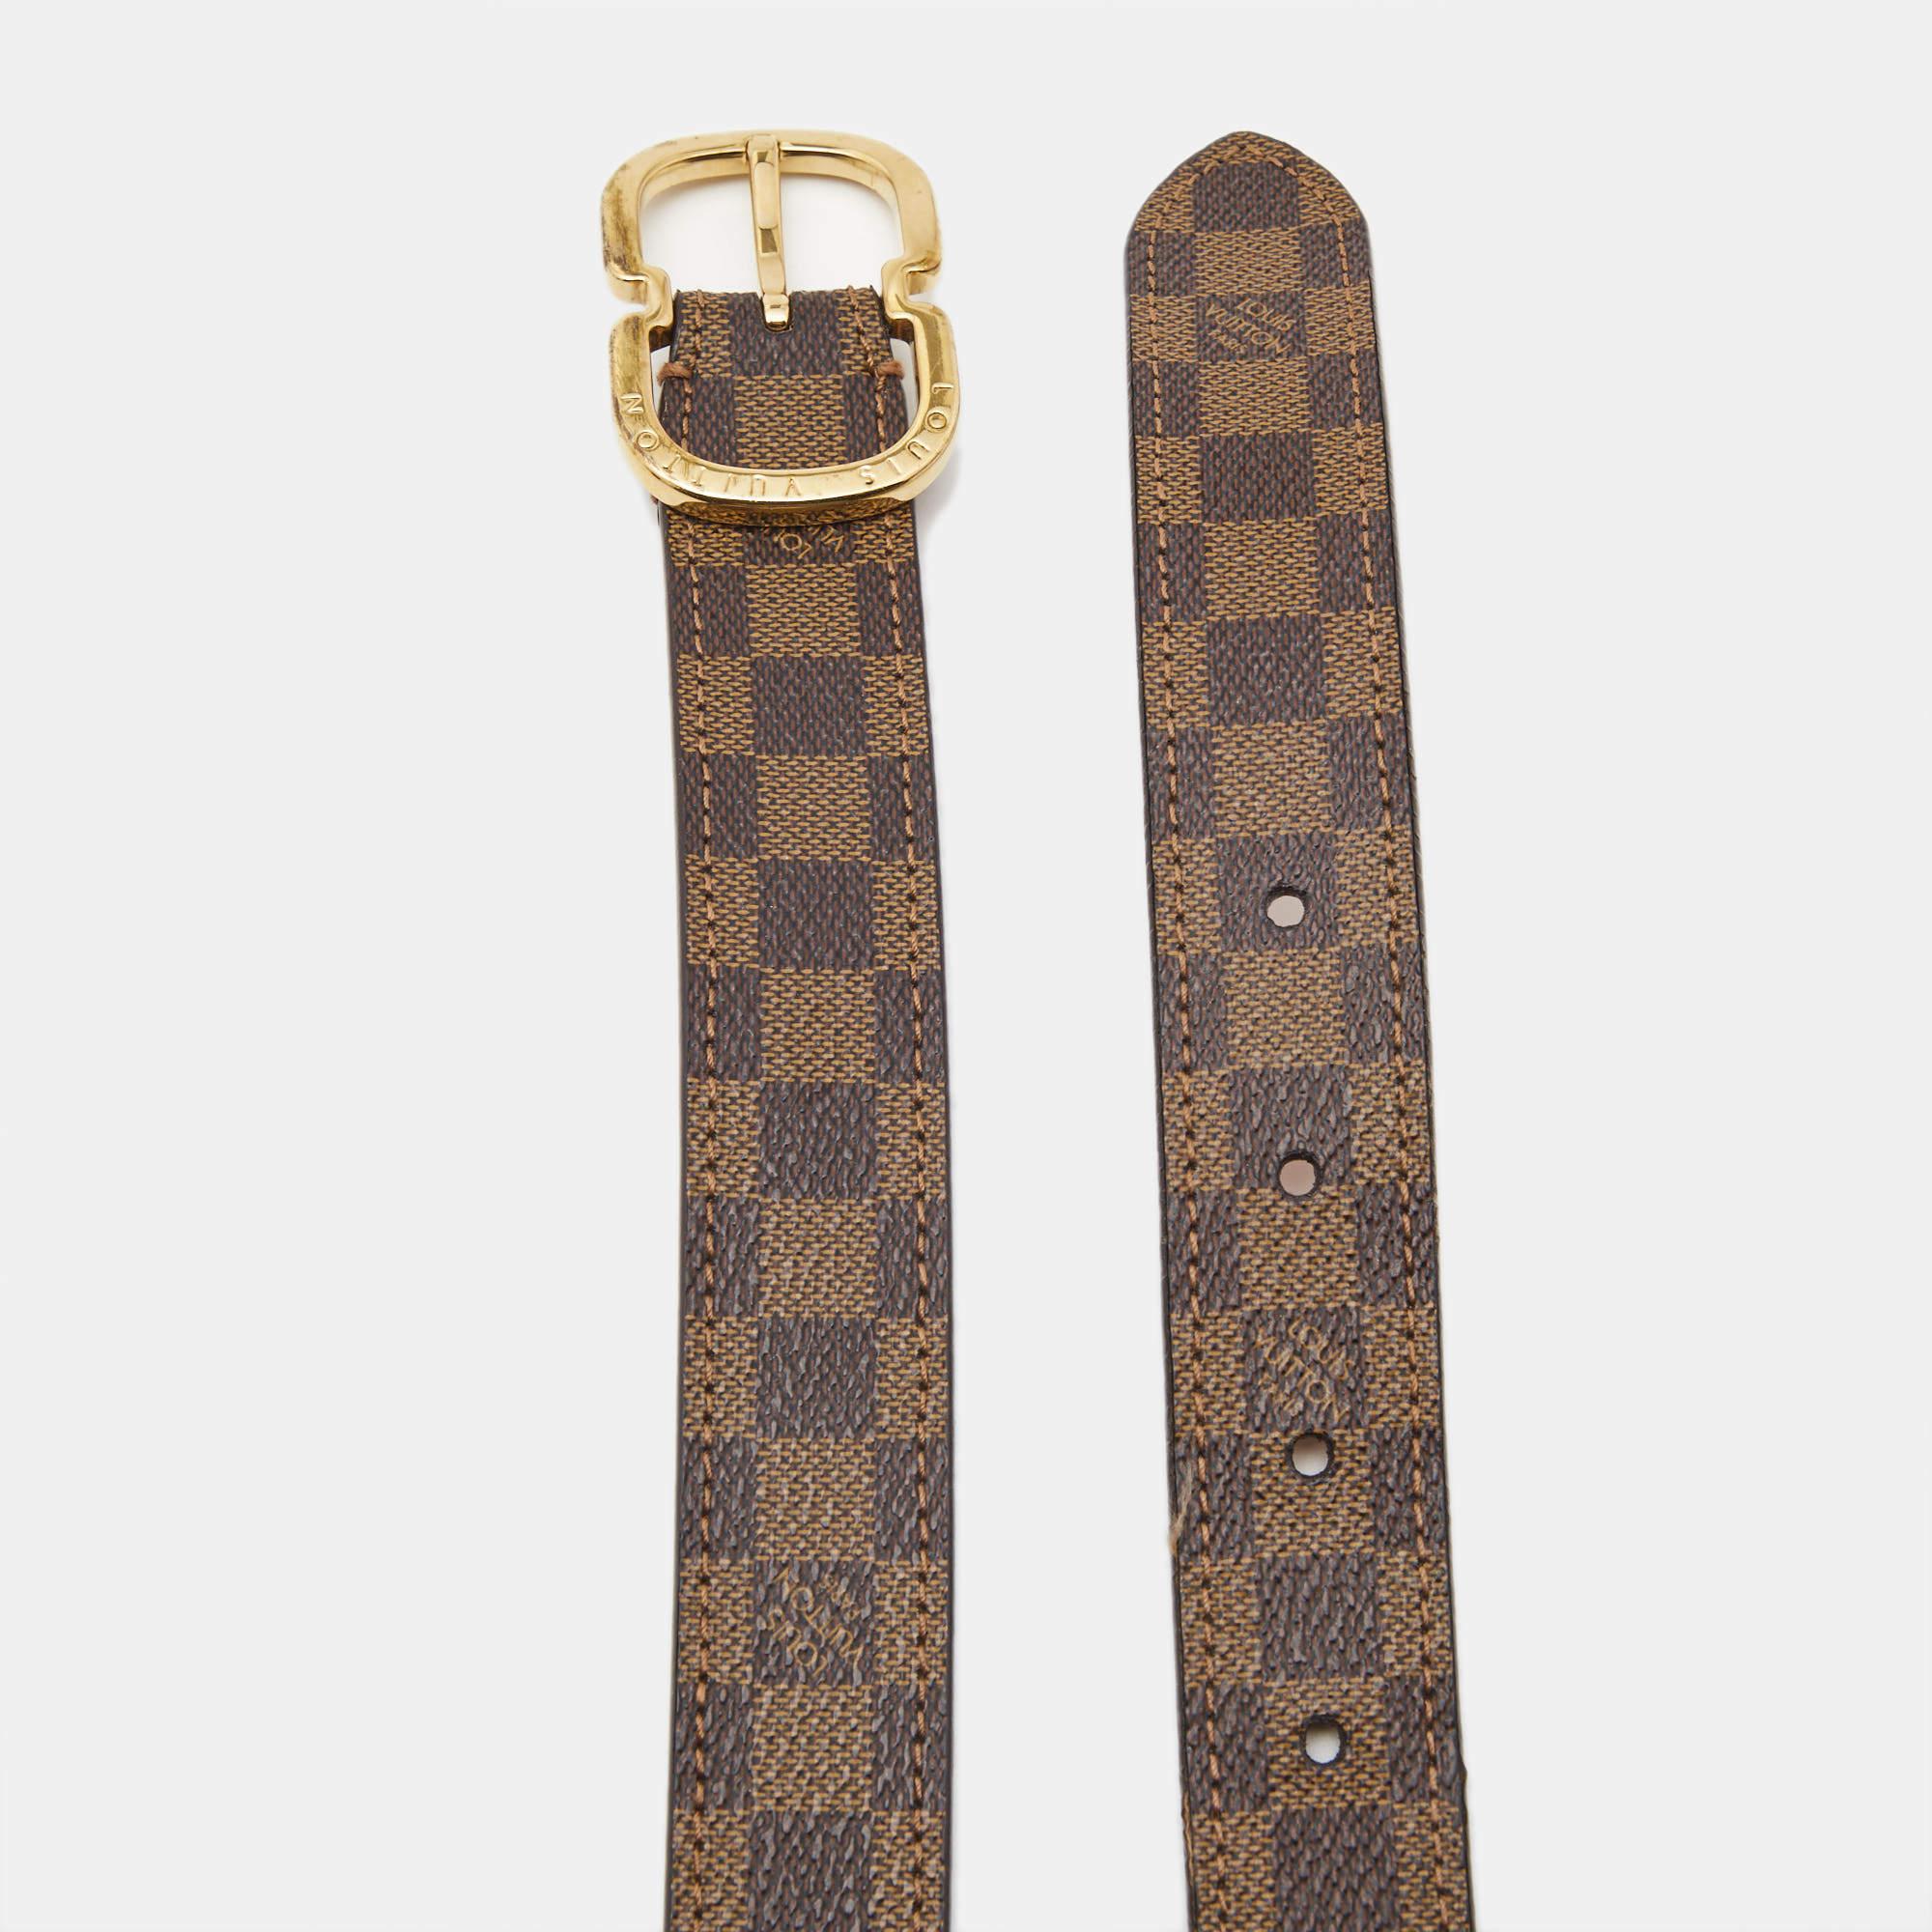 Add a sleek finish to your OOTD with this Louis Vuitton Damier Ebene belt. It is carefully crafted to last well and boost your style for a long time.

Includes: Original Dustbag, Original Box